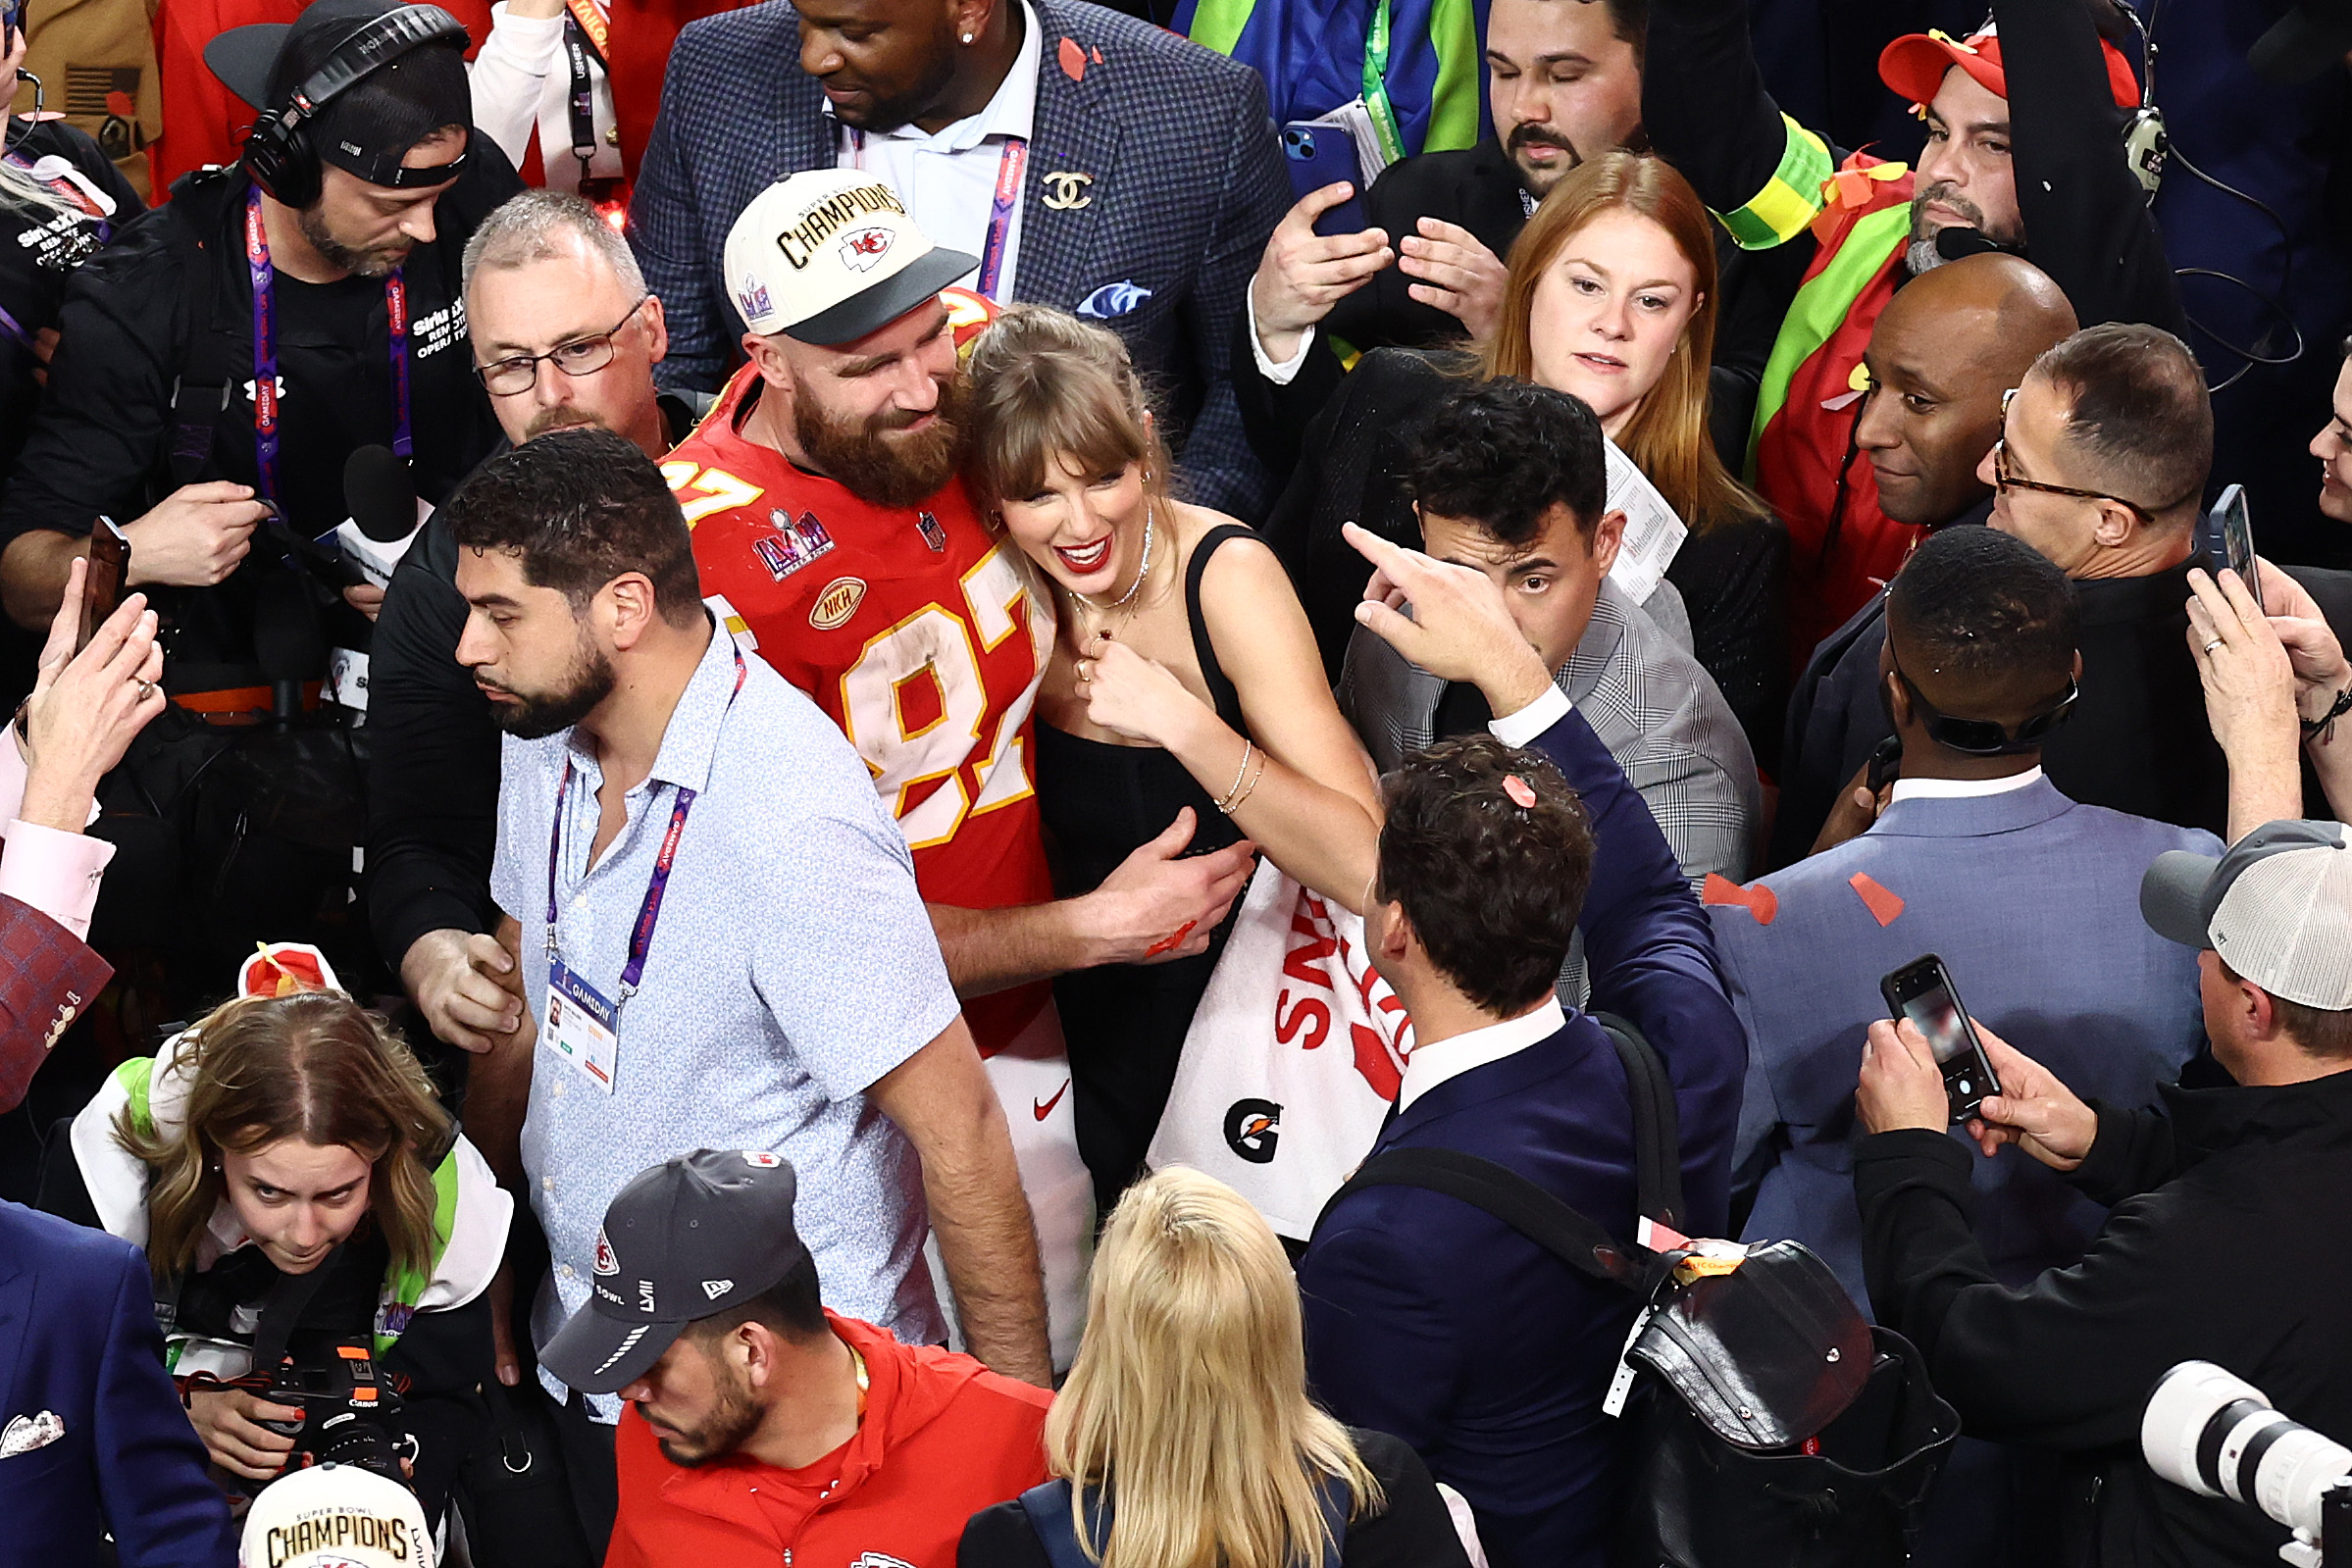 Kelce did not end up proposing to Swift after the Super Bowl win